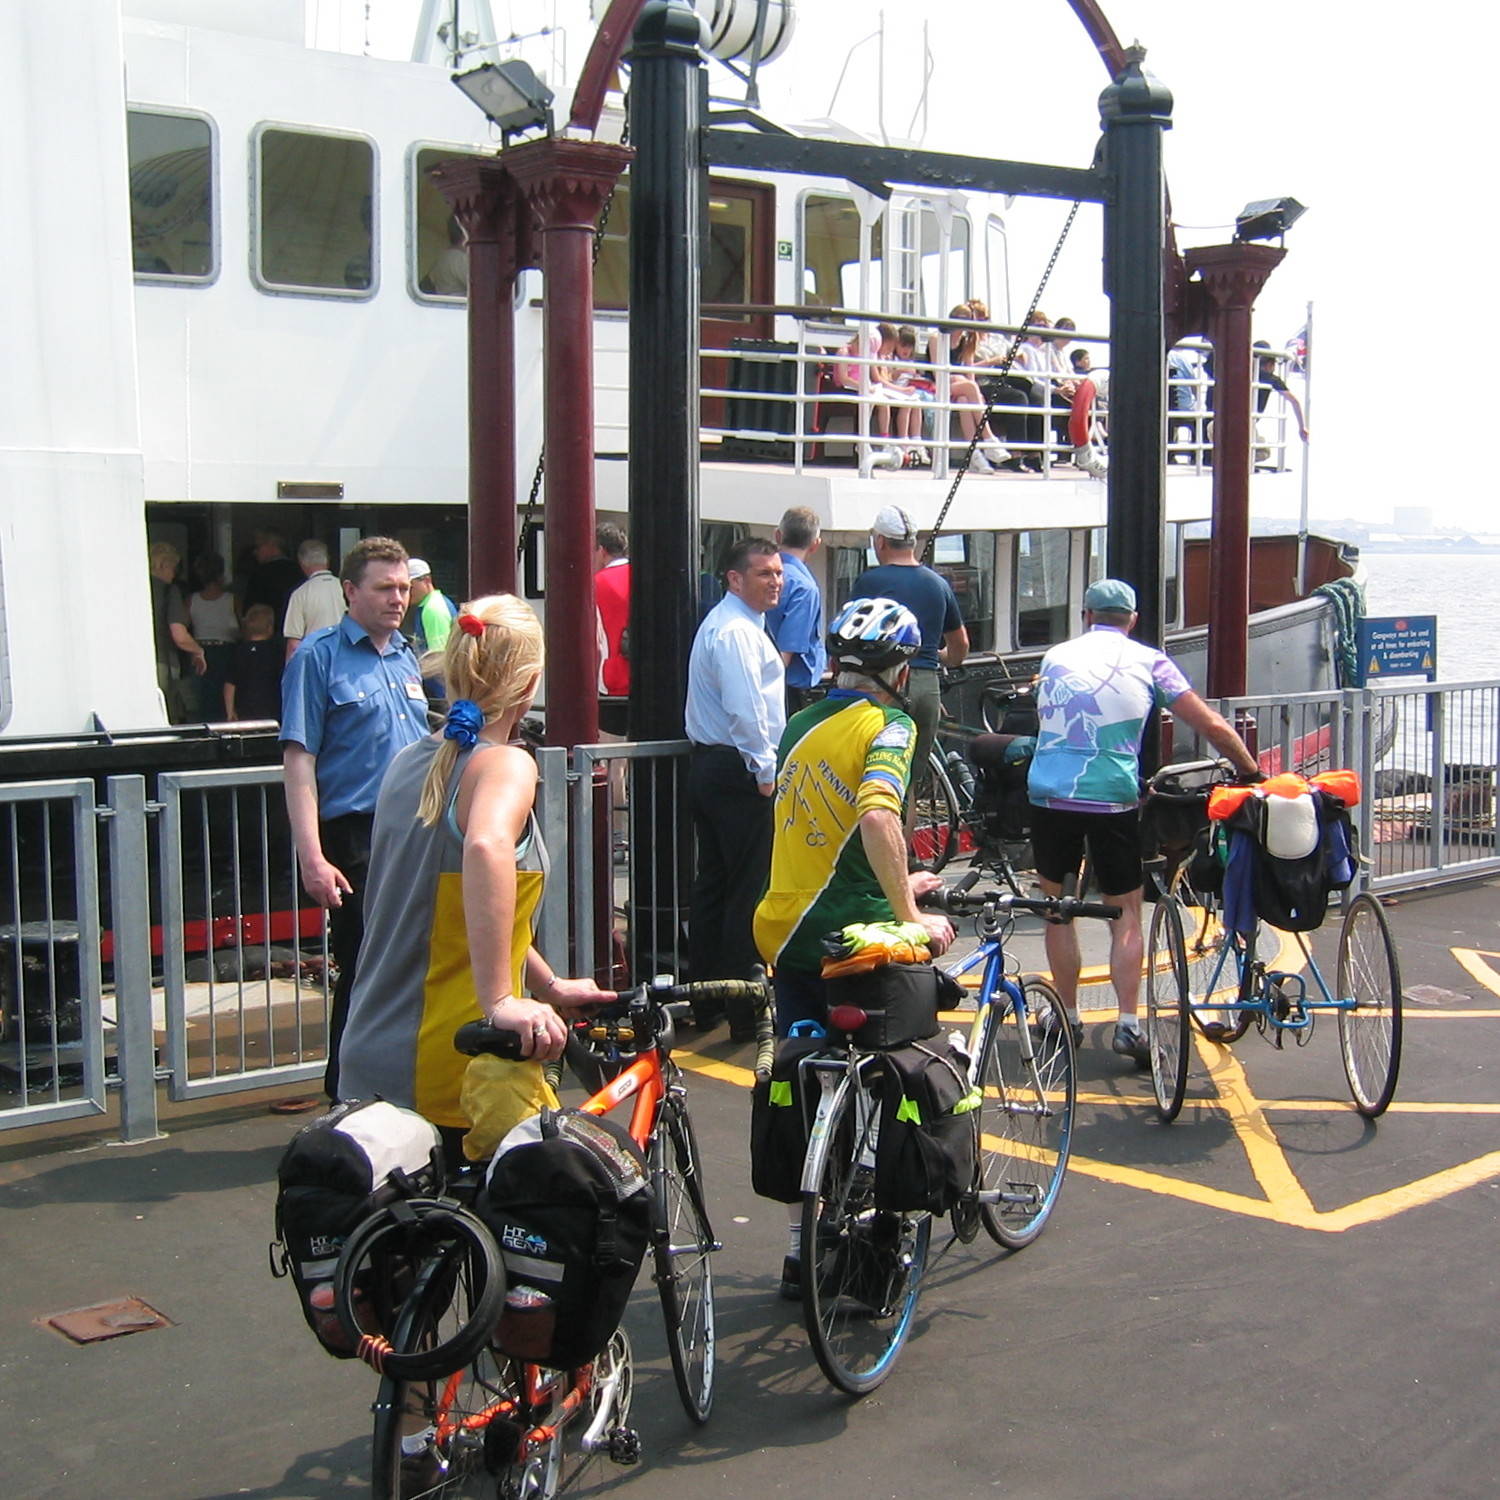 A picture of cyclists boarding the Mersey Ferry.